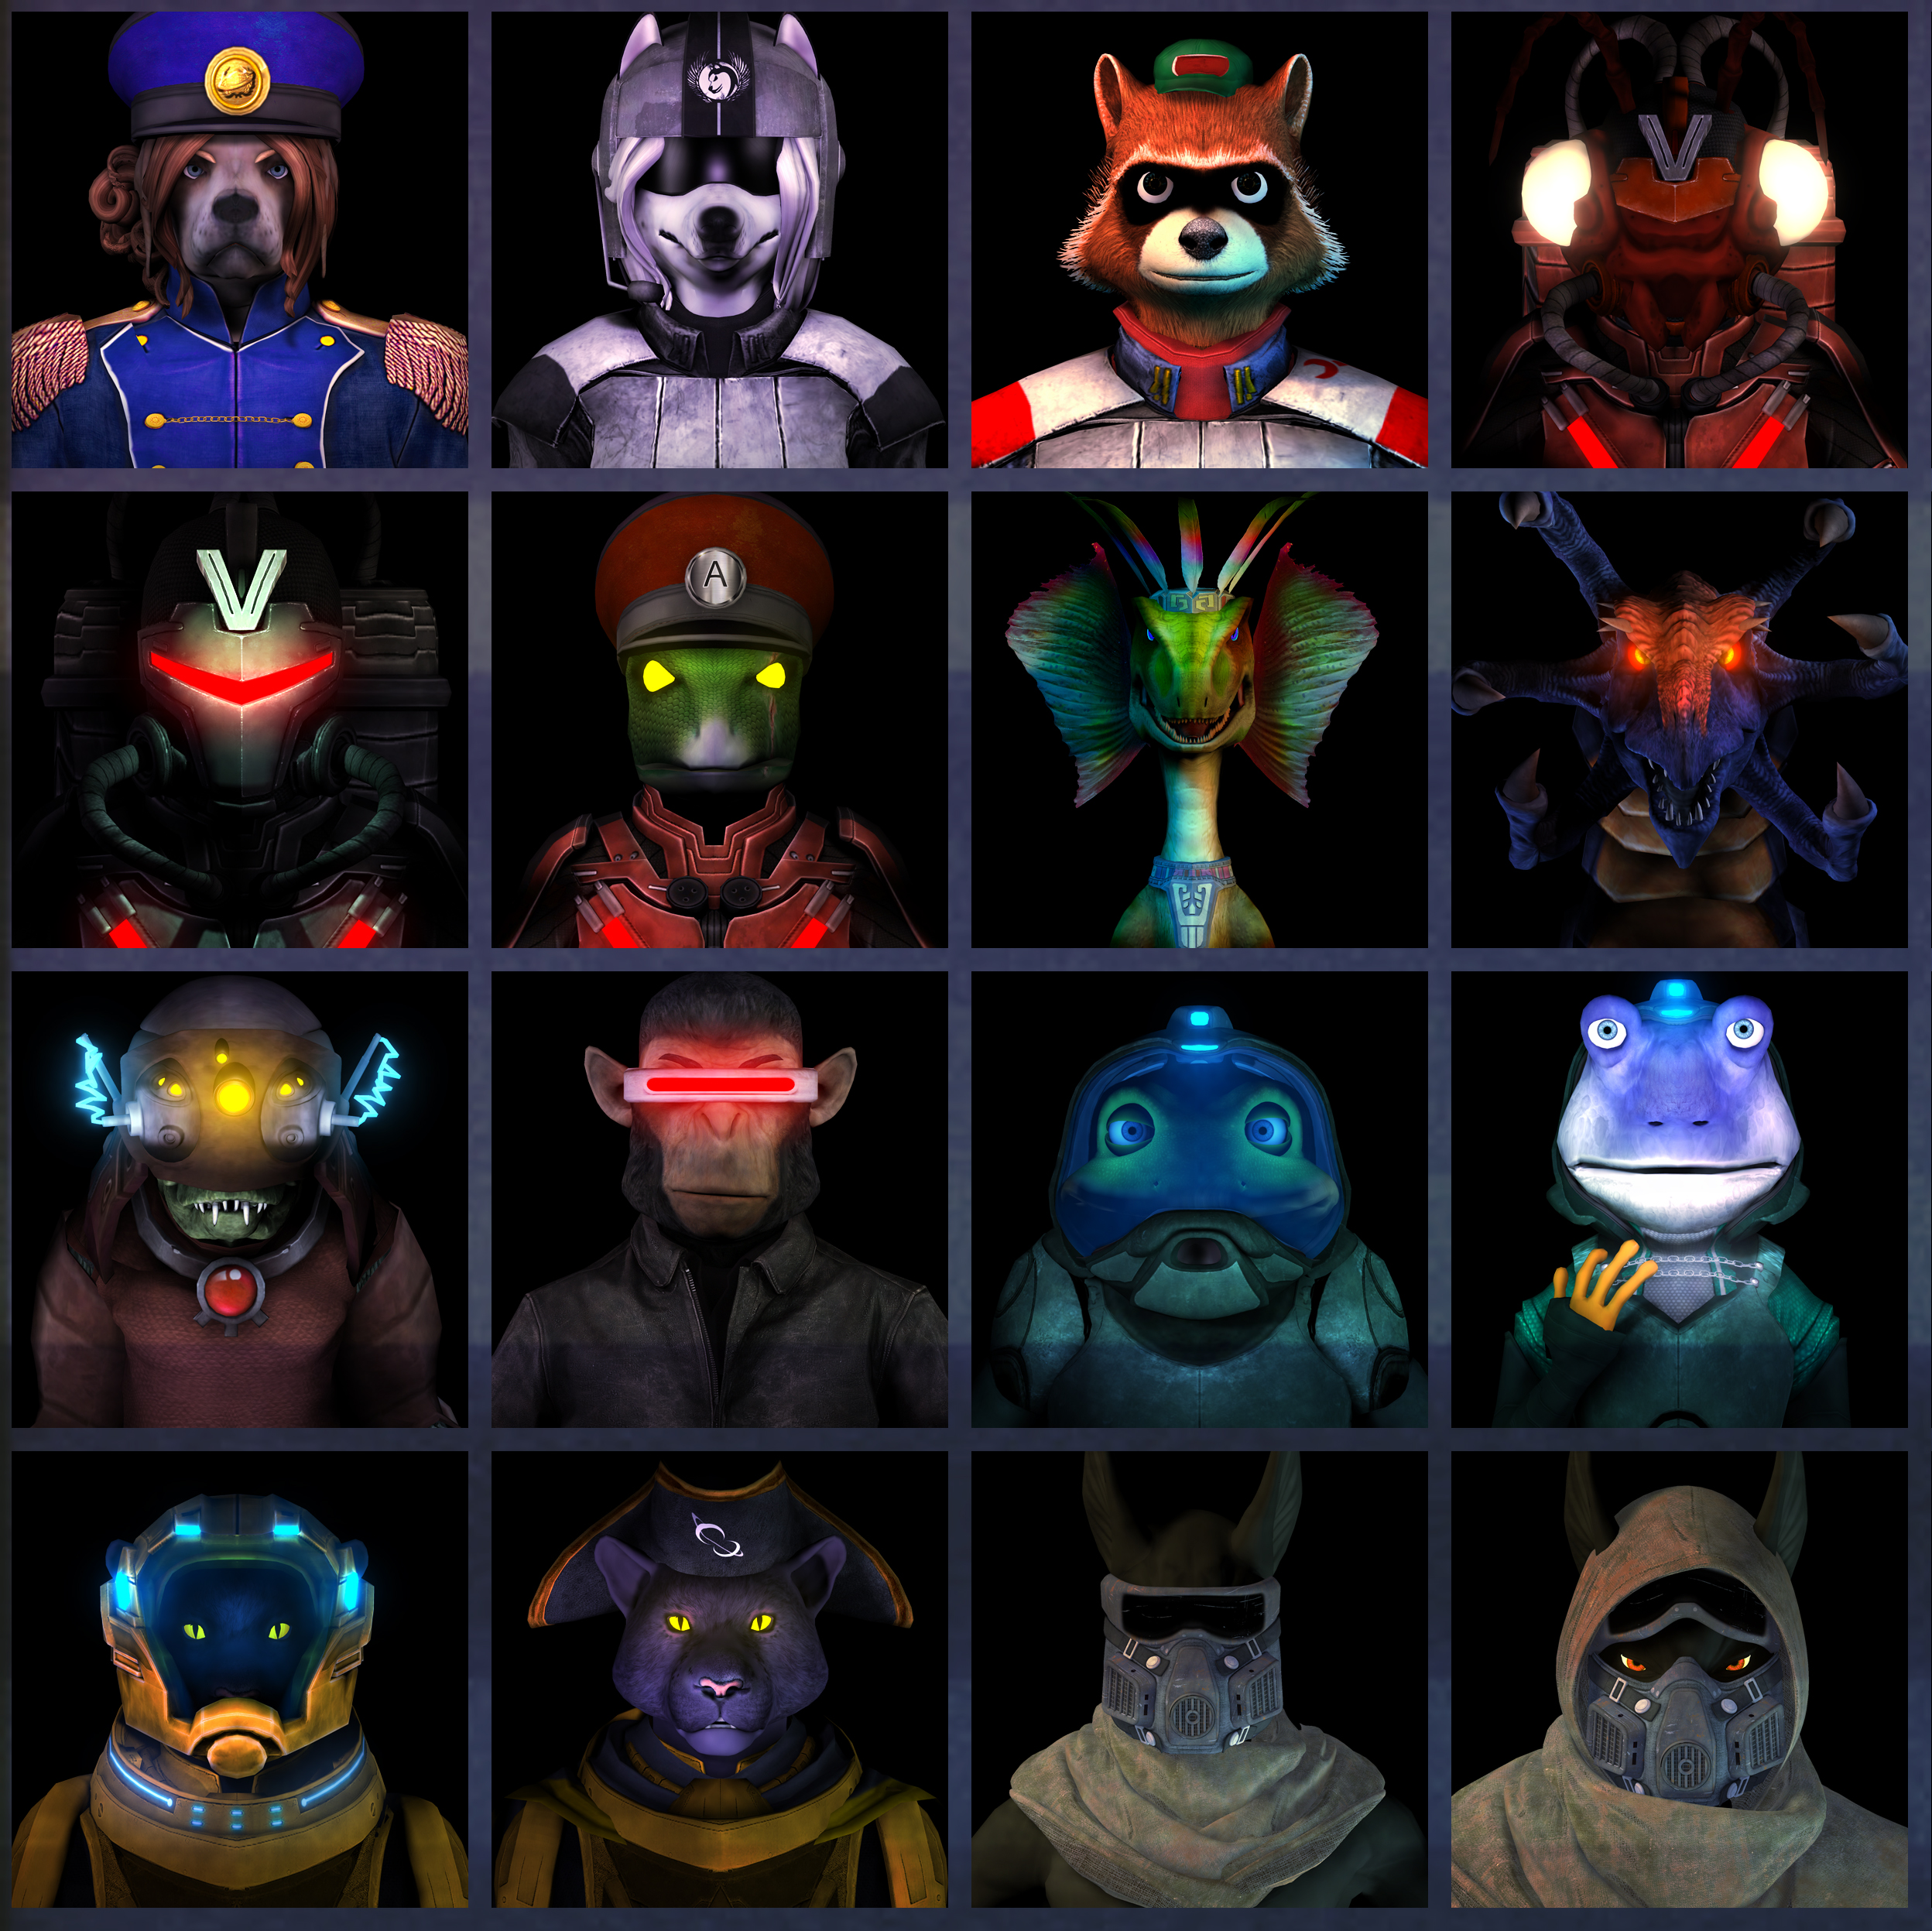 Images - Star Fox: Event Horizon mod for Freespace 2.